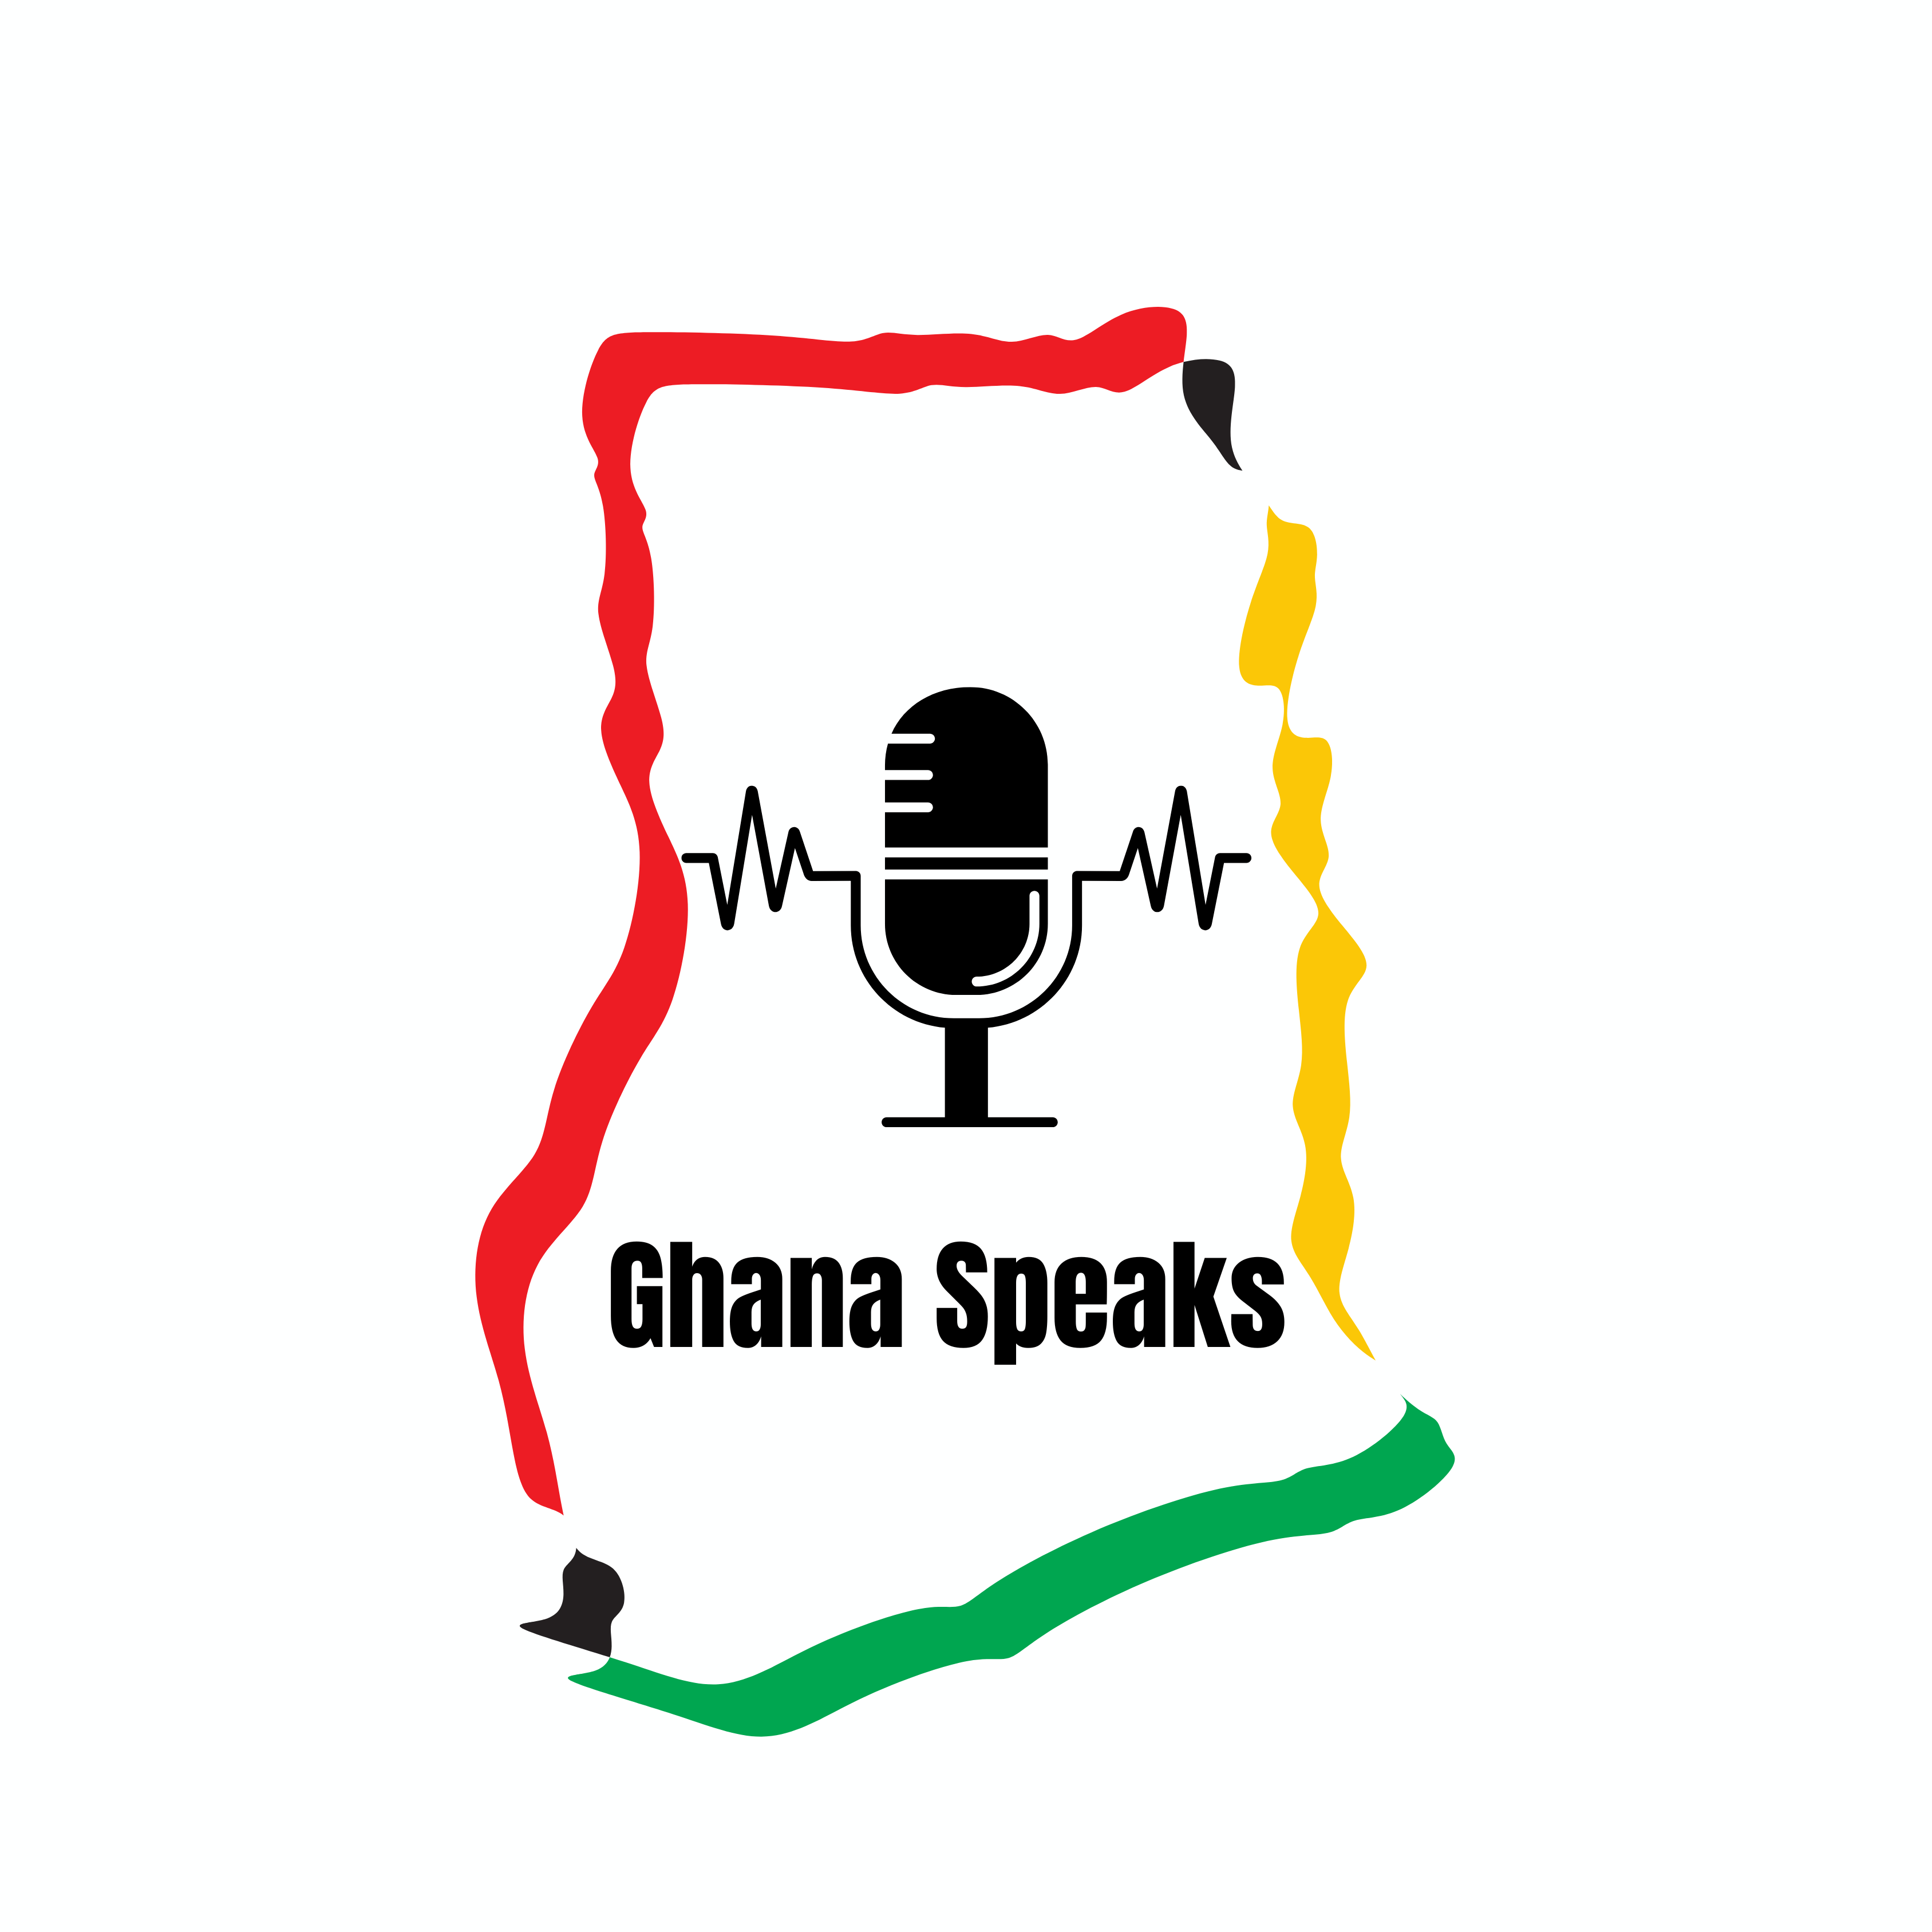 The Legion Introduces "Ghana Speaks Debate" to Foster Youth Engagement and Critical Discourse Ahead of 2024 General Elections